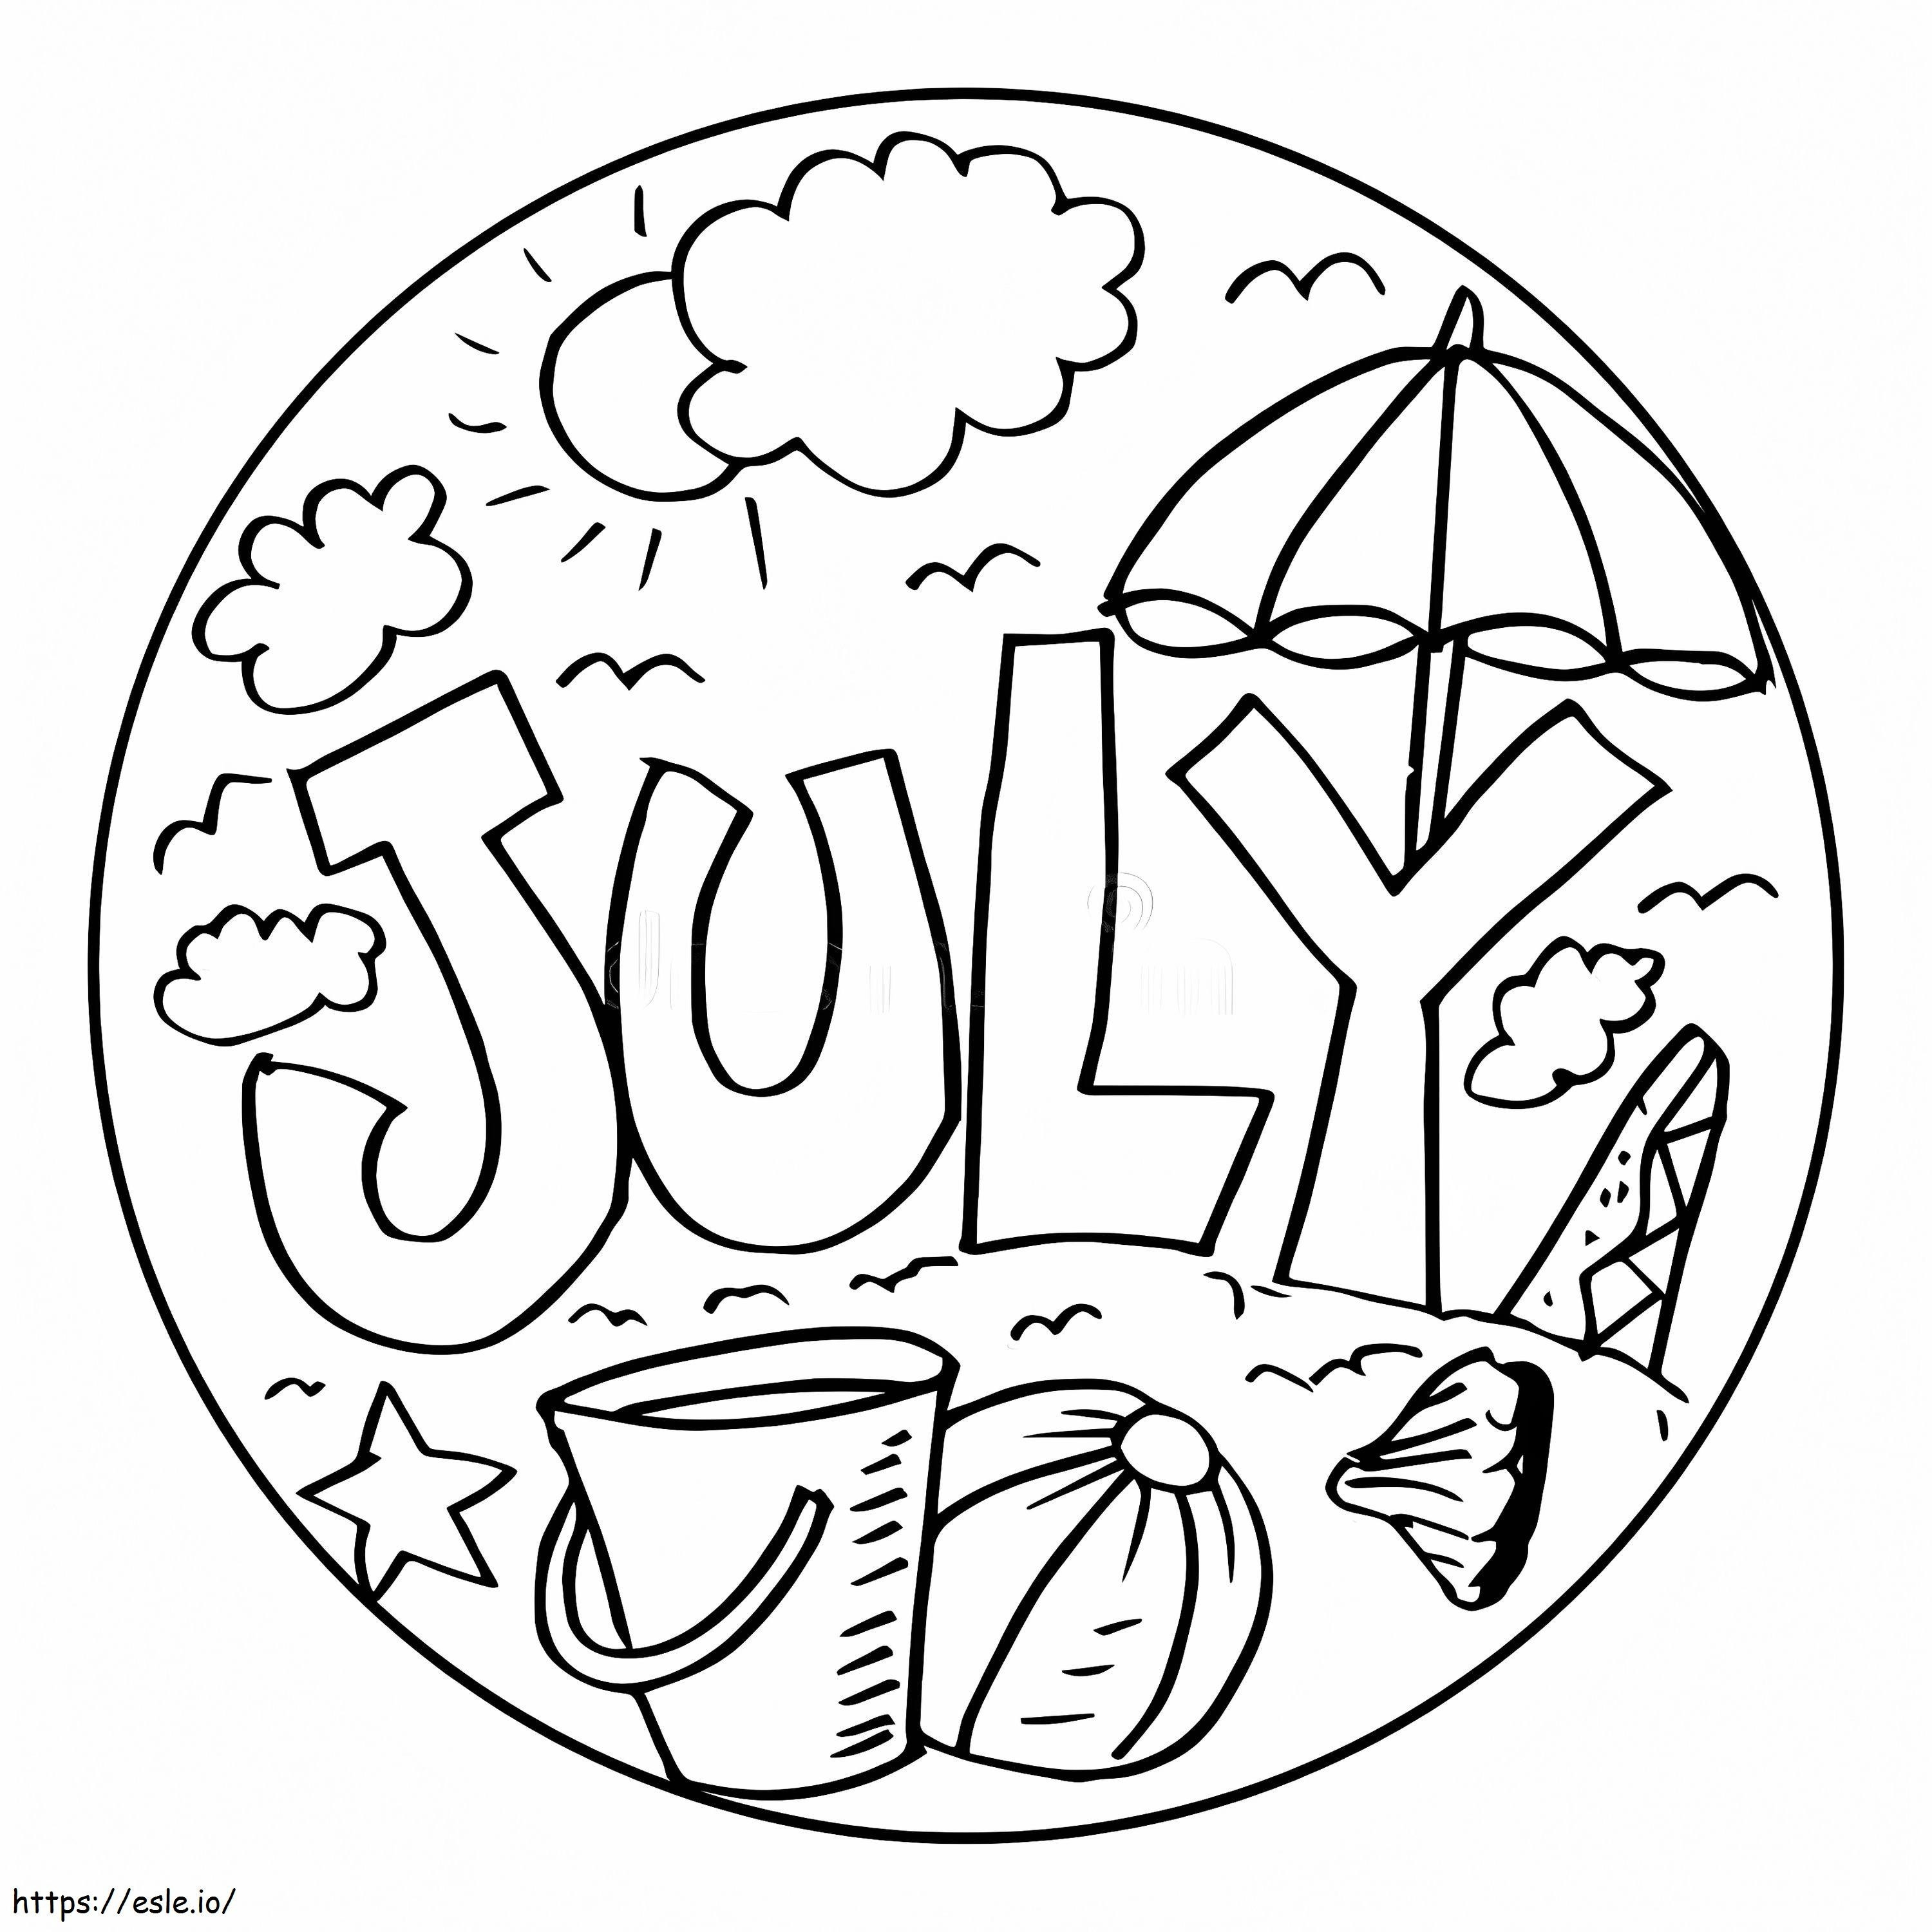 July 1 coloring page